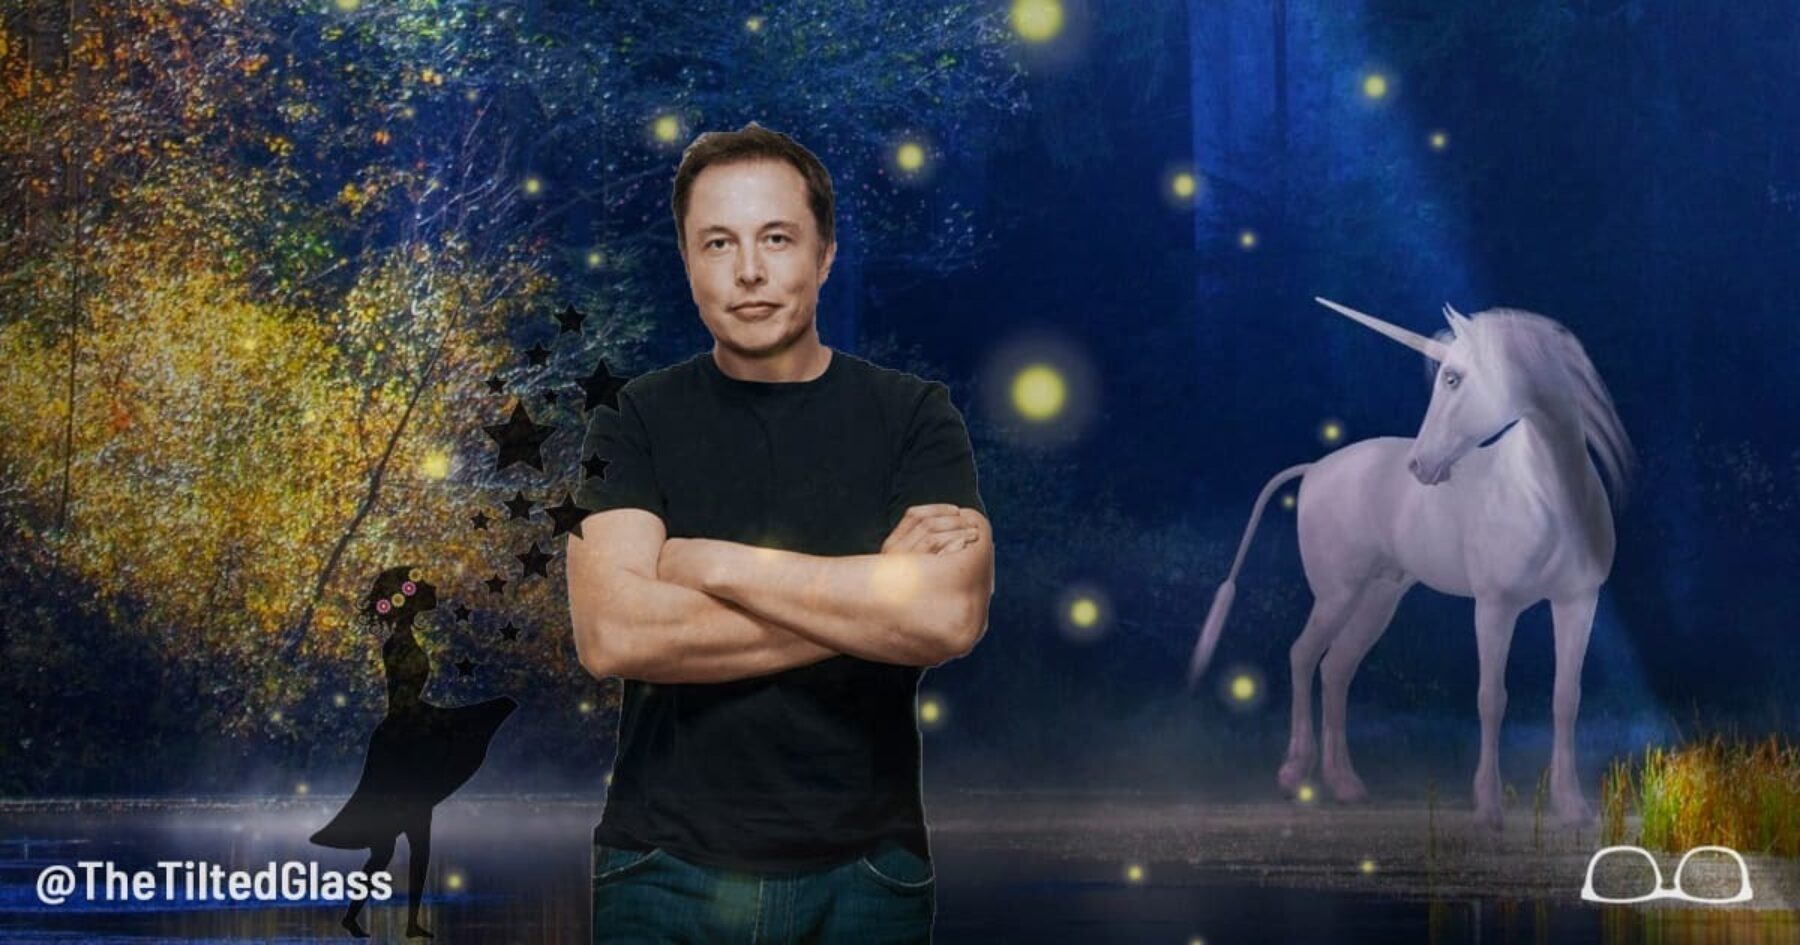 Elon Musk Scolds Wall Street: “I’m Magic and Can Do Whatever I Want”